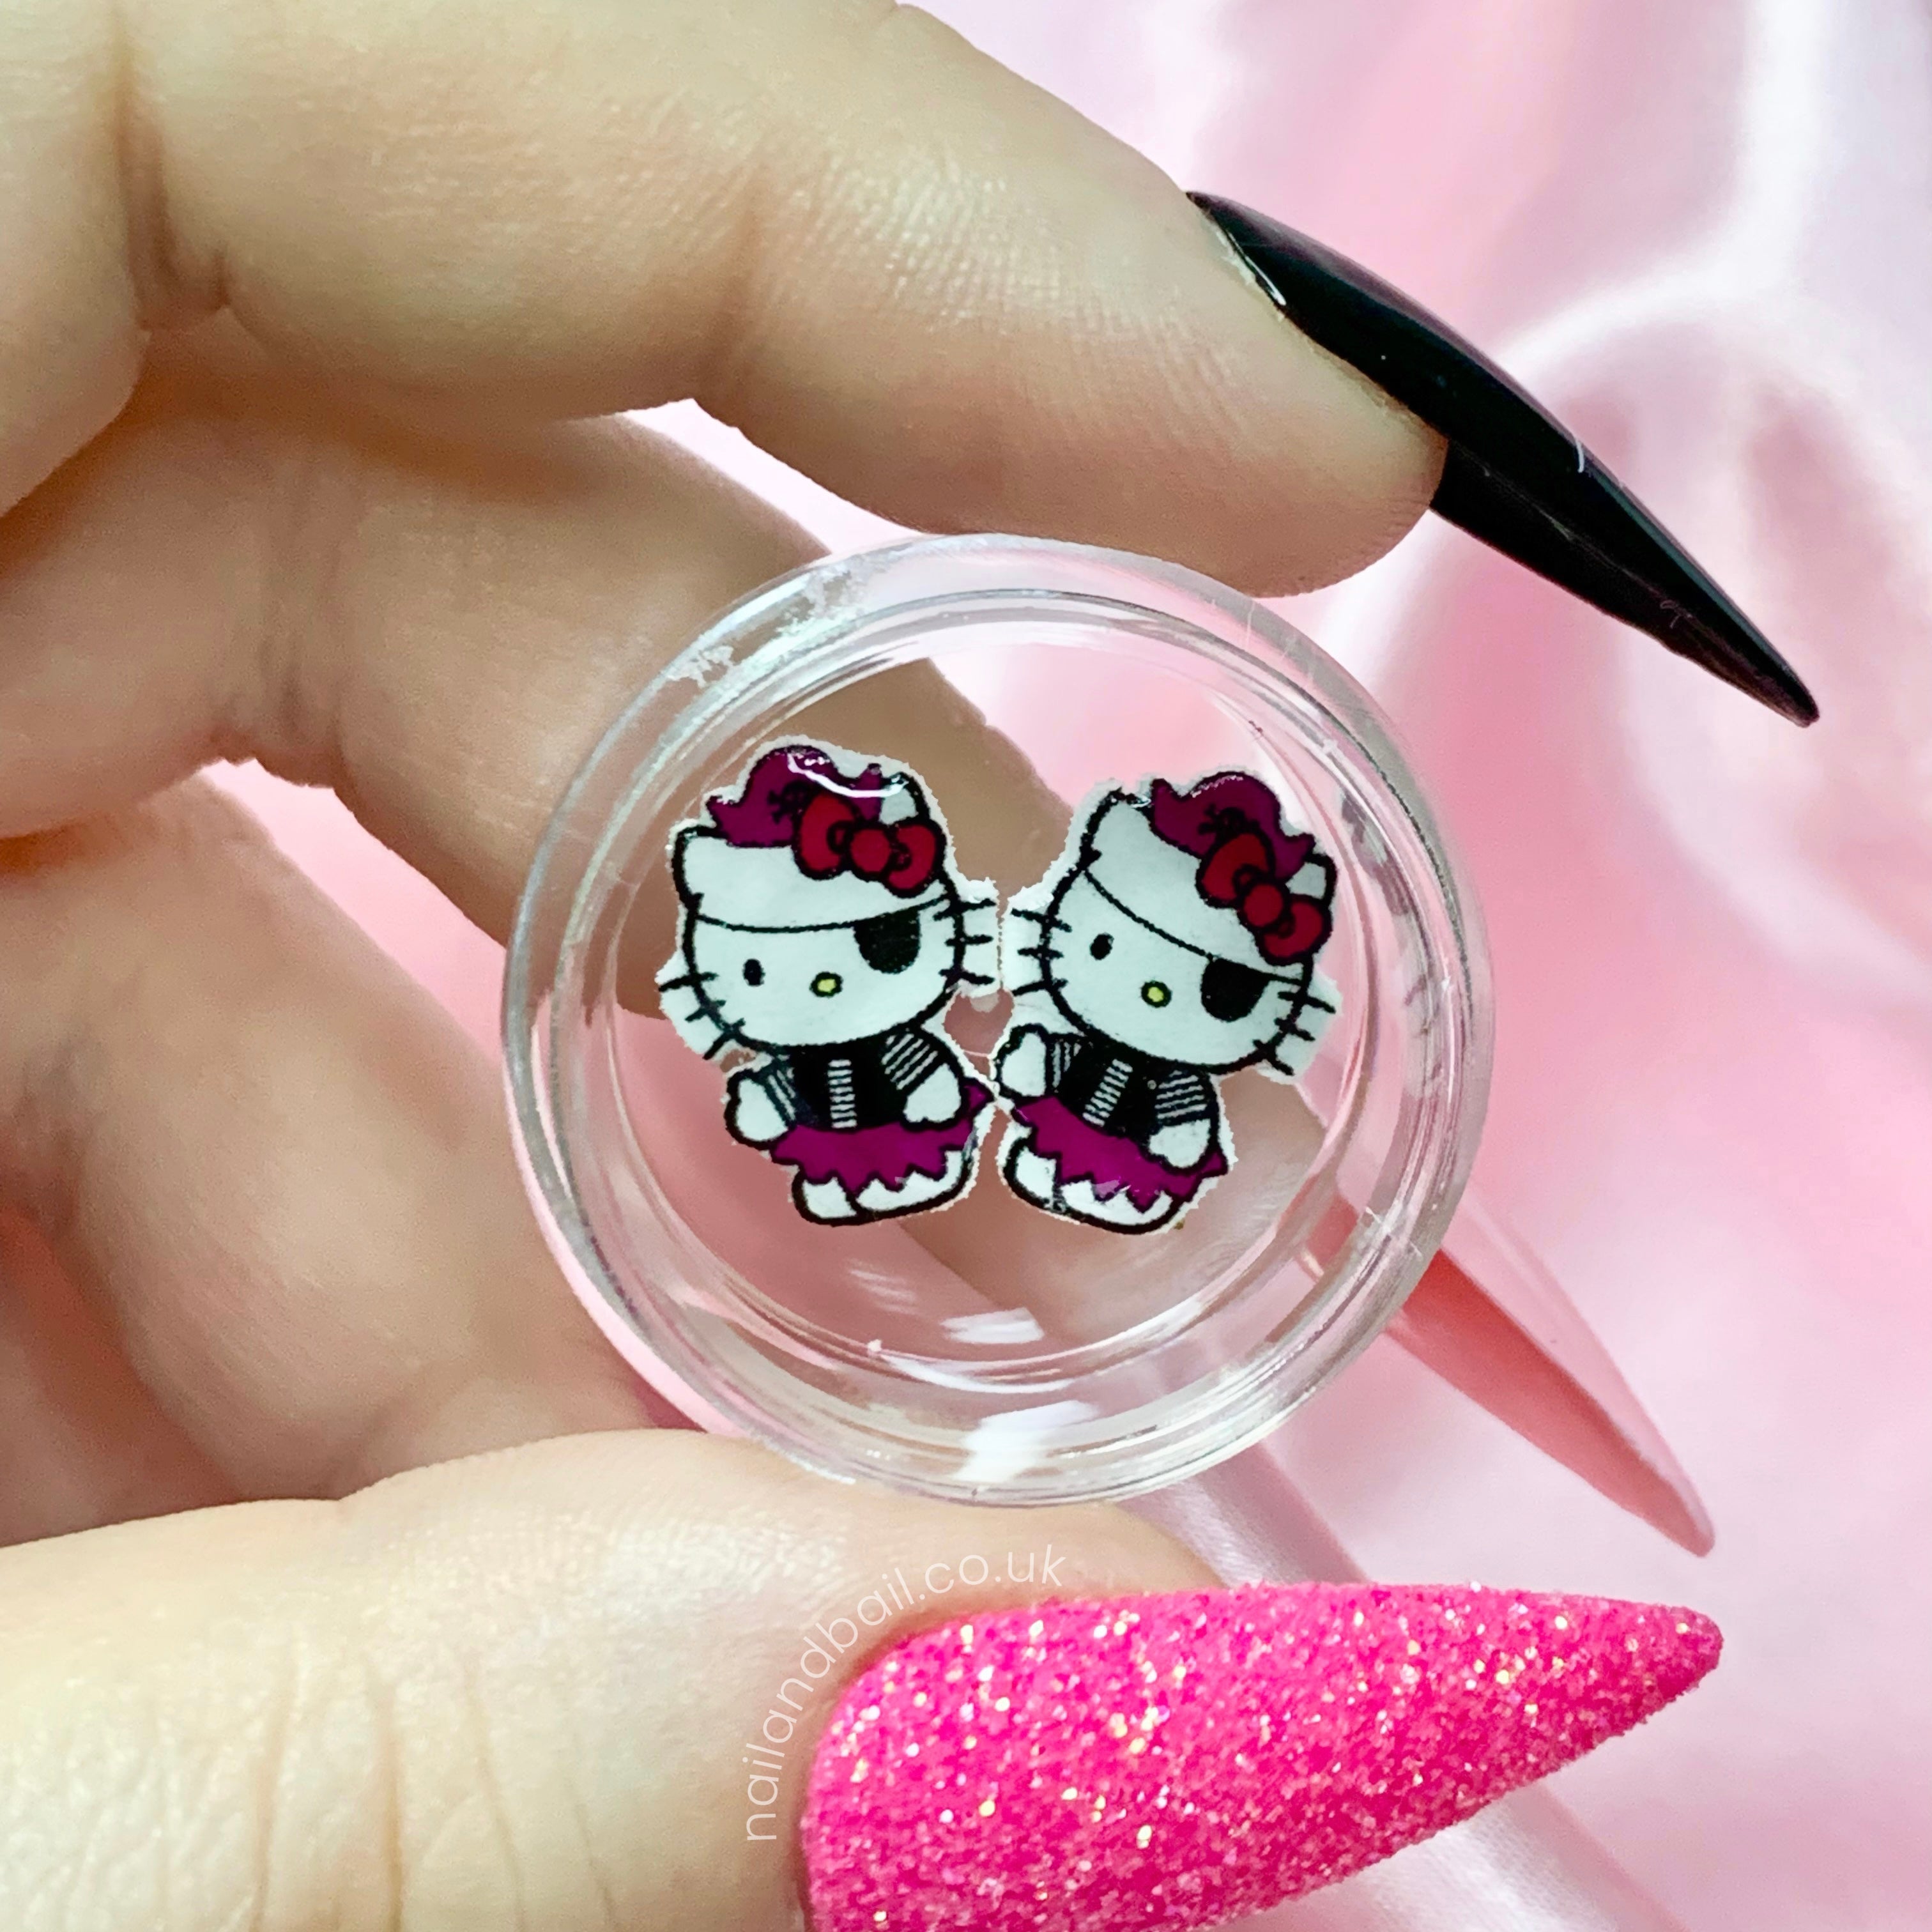 54 Hello Kitty Nail Designs and Ideas for 2023 - Nerd About Town